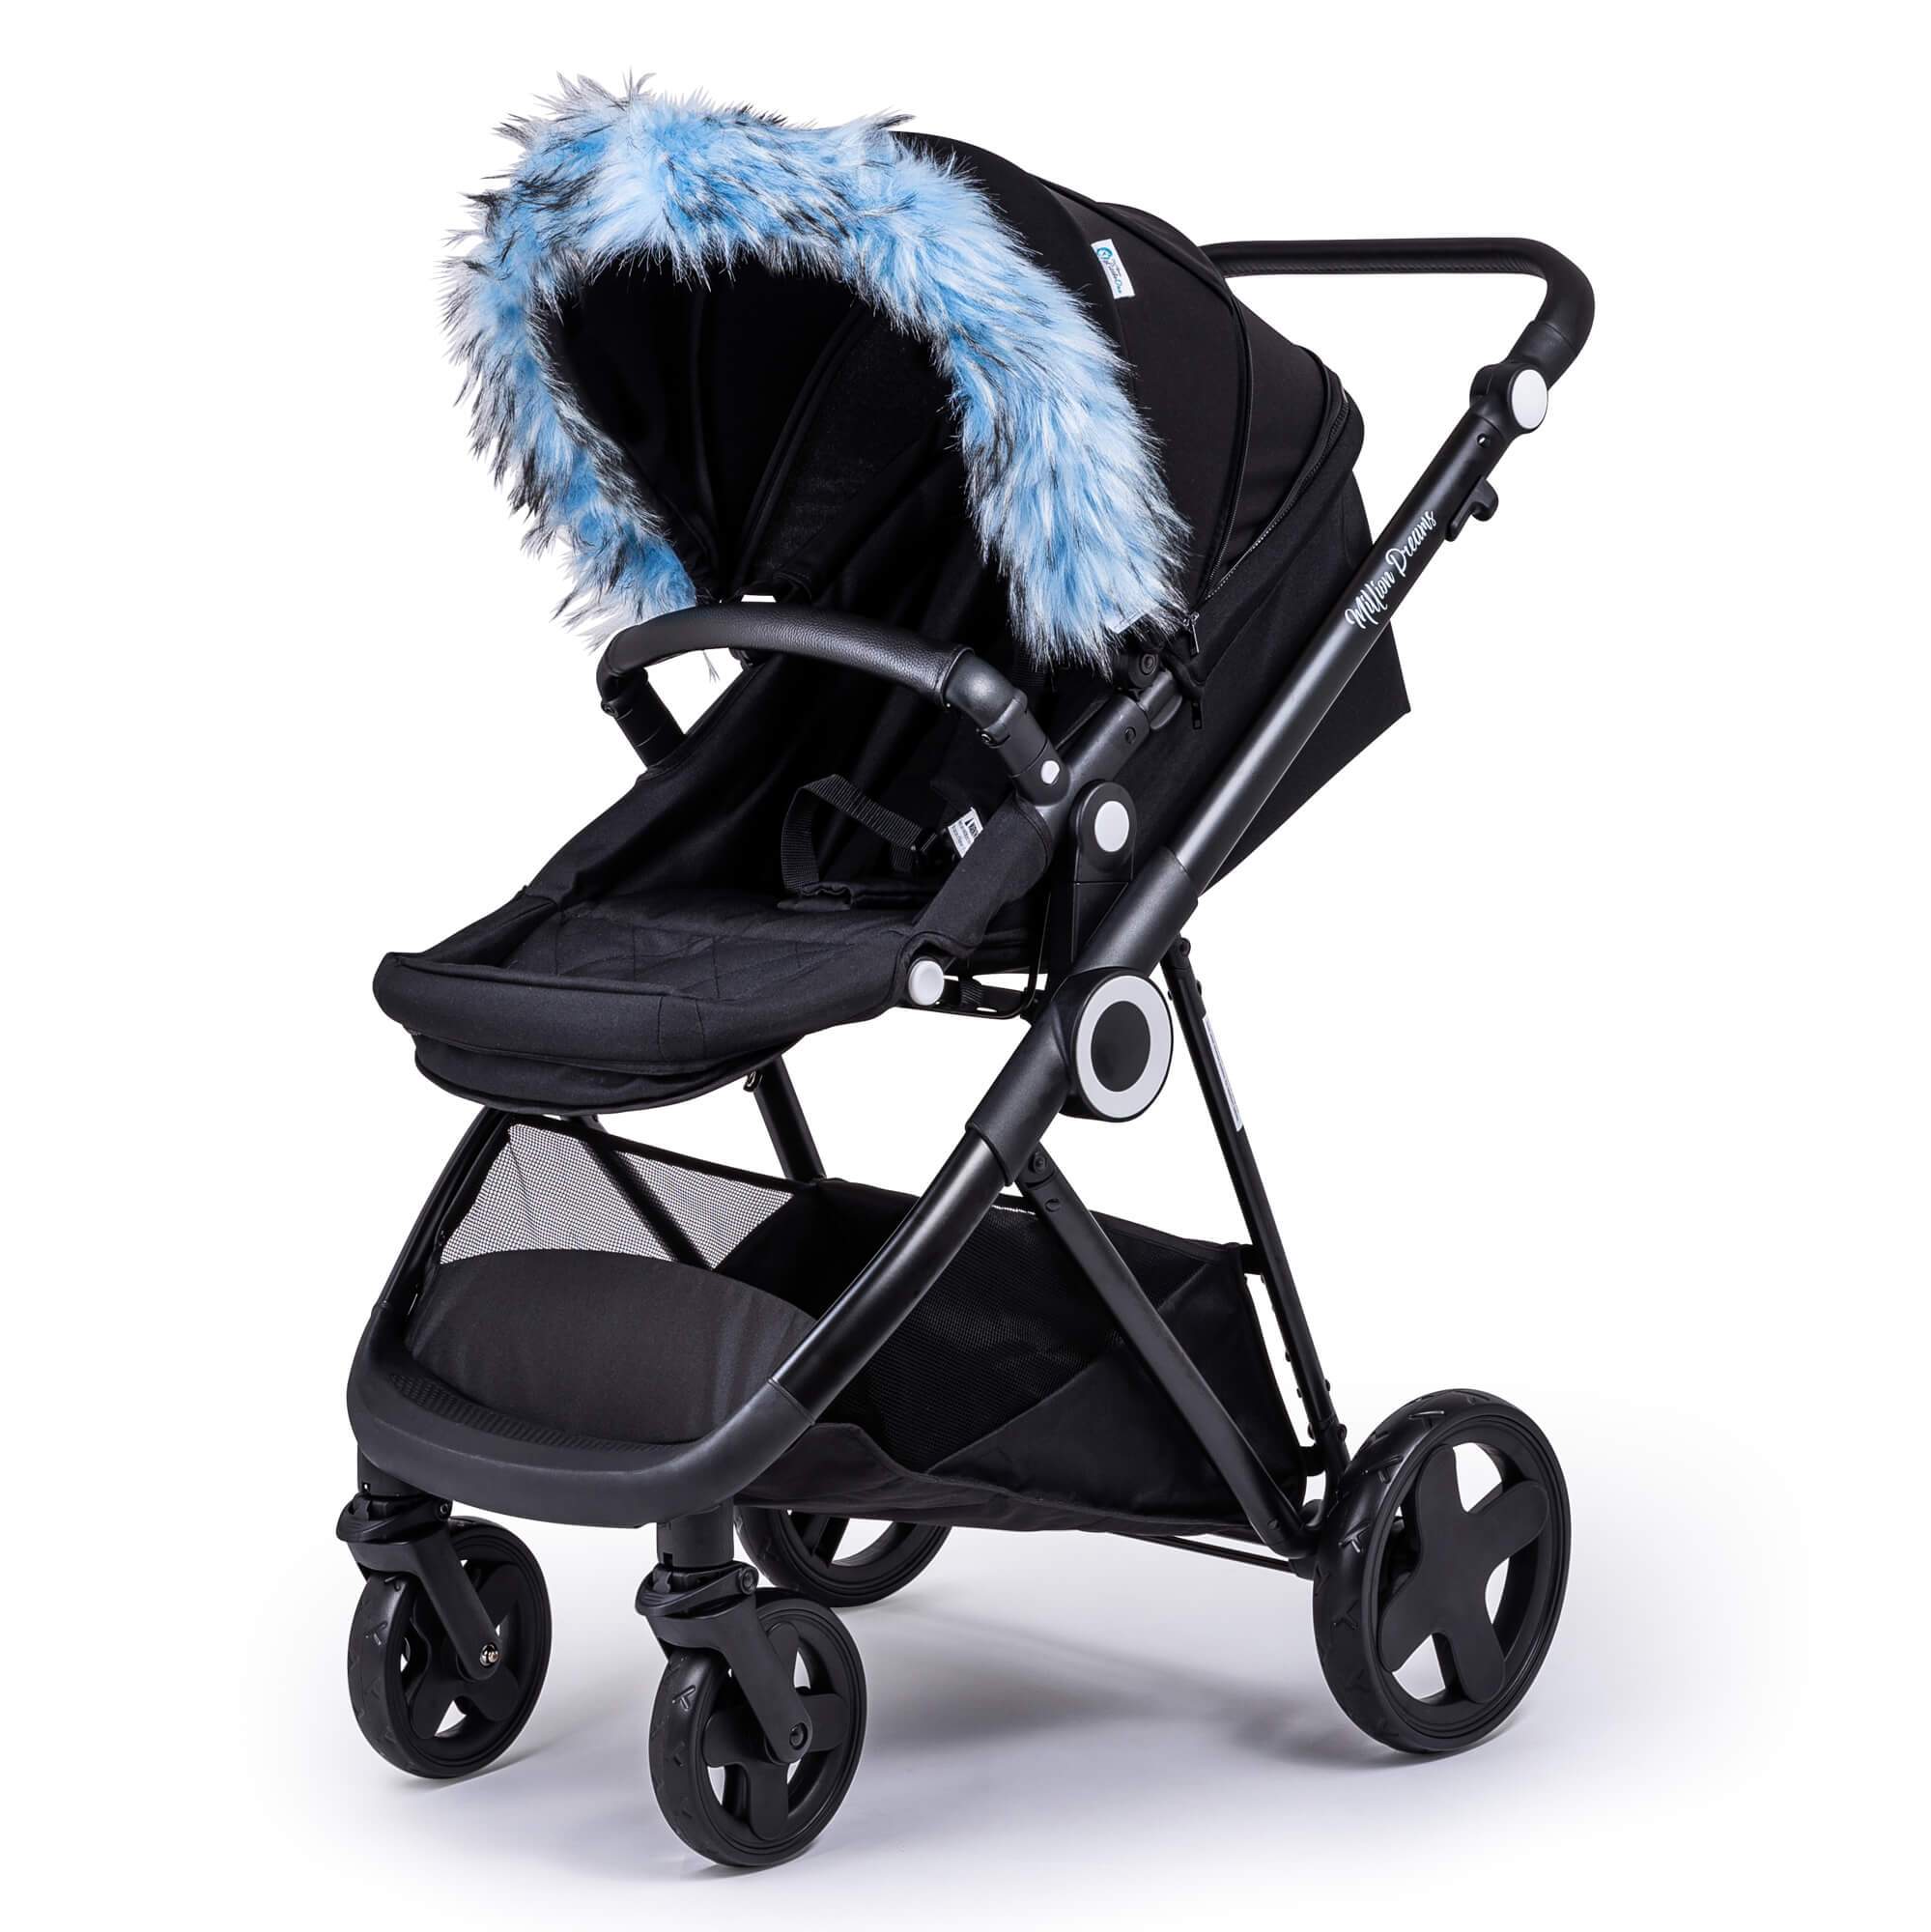 Pram Fur Hood Trim Attachment for Pushchair Compatible with Cam - Light Blue / Fits All Models | For Your Little One